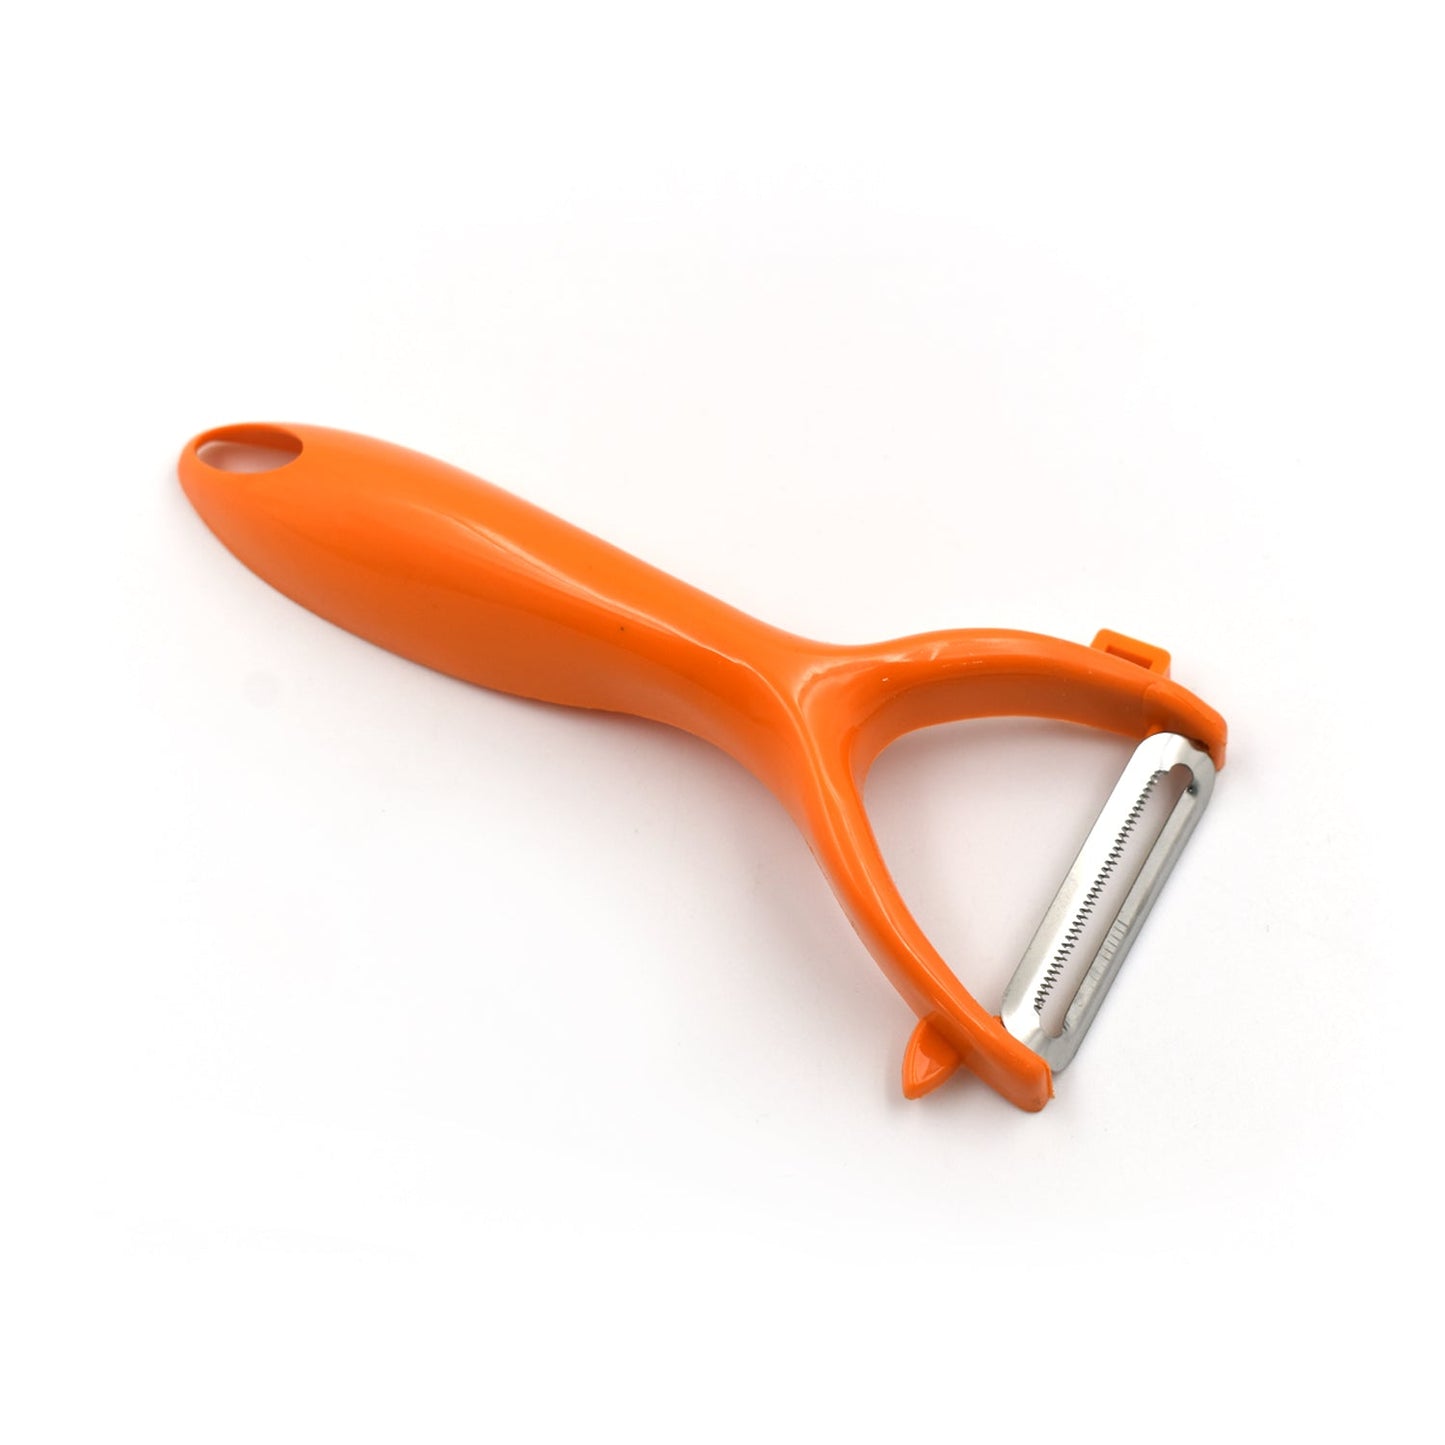 2696 Vegetable and Fruit Peeler For kitchen Use